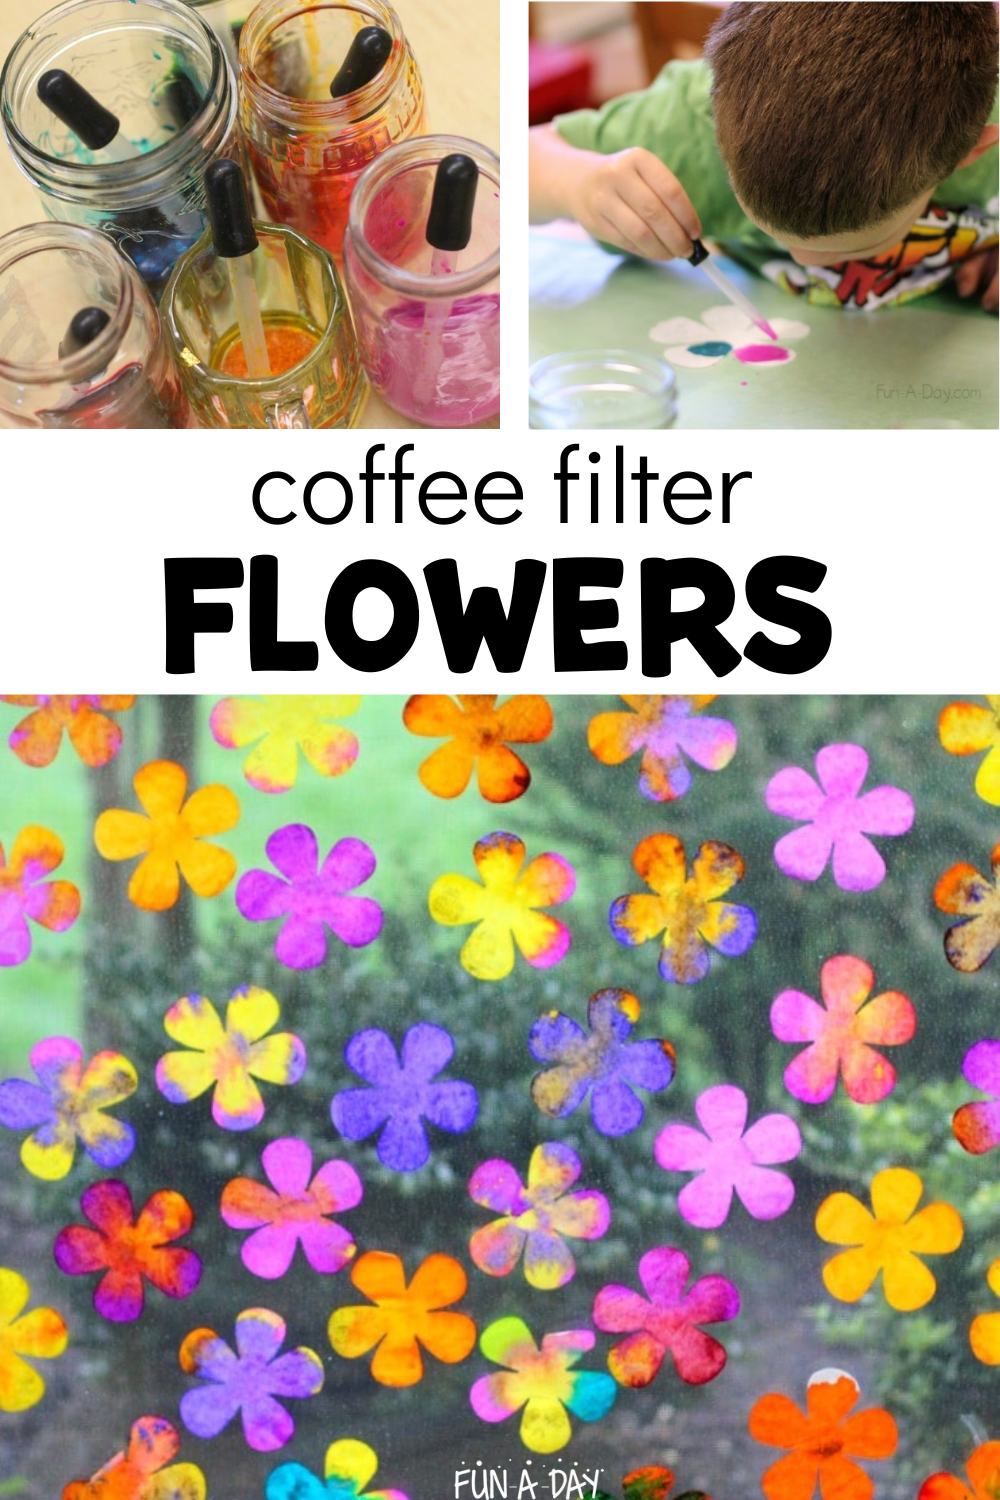 preschooler creating flower coffee filter art with text that reads coffee filter flowers